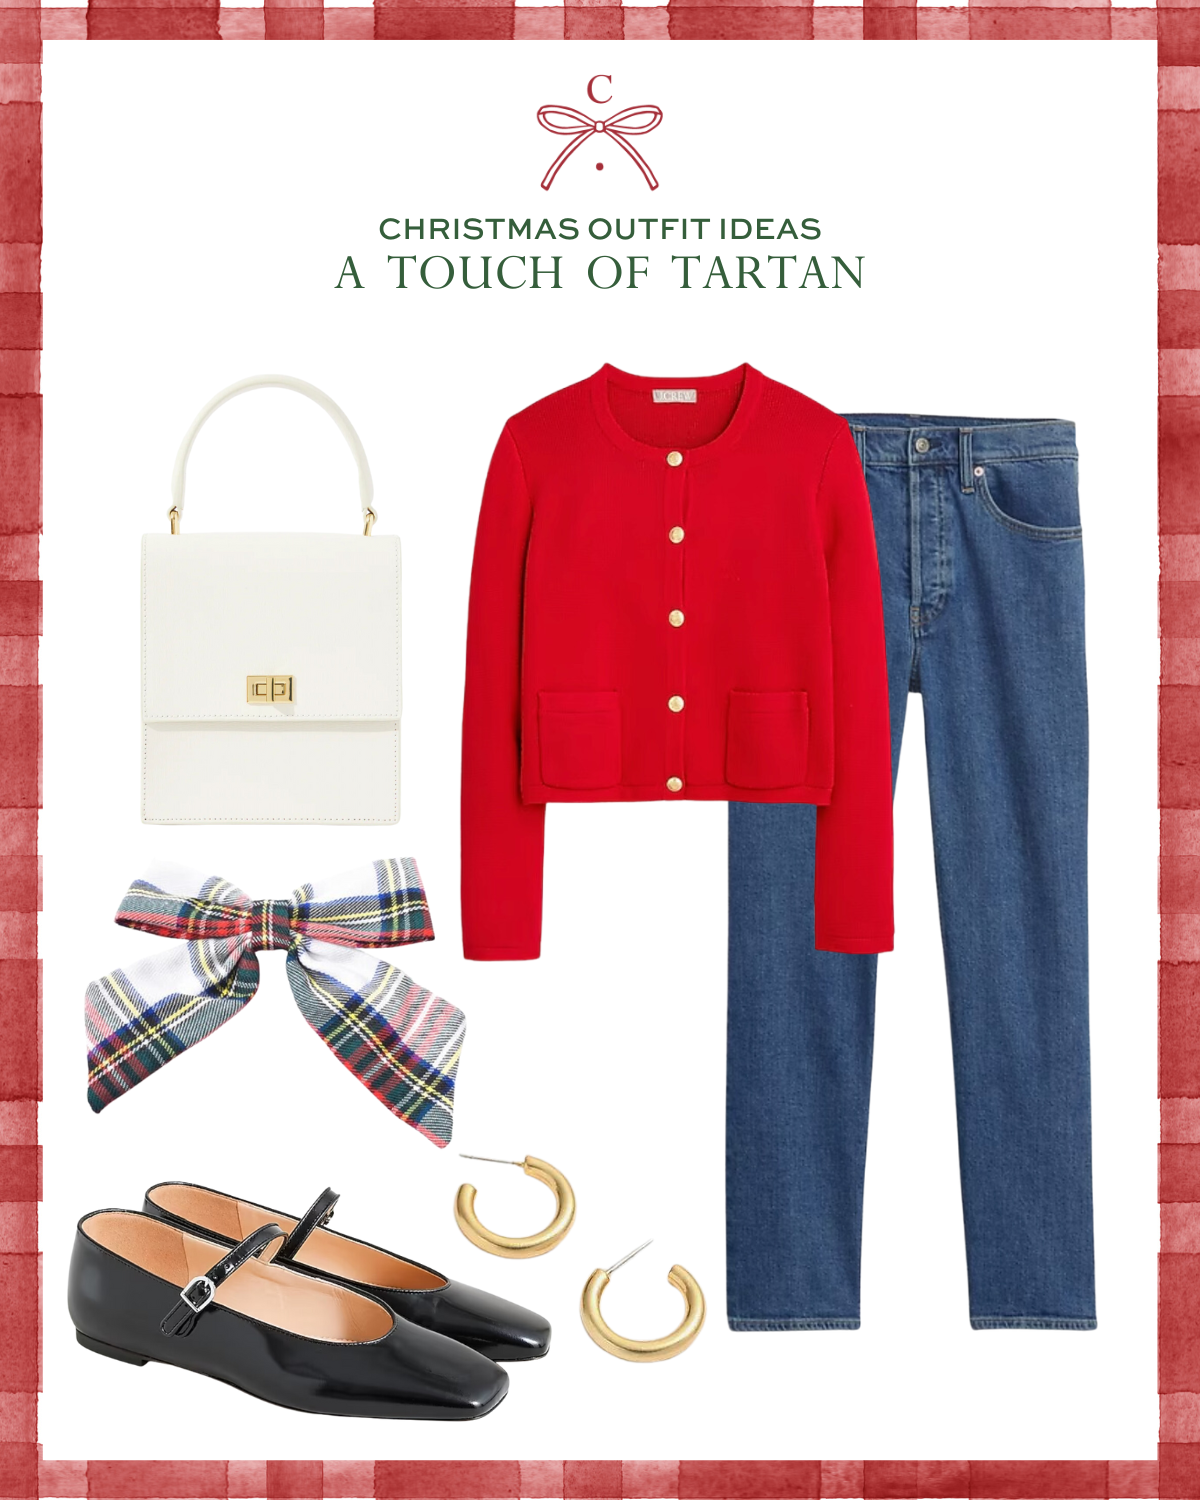 Christmas outfit ideas including J.Crew Emilie Patch-Pocket Sweater Lady Jacket, Neely & Chloe 19 The Mini Lady Bag, Gap High Rise Cheeky Straight Jeans, J.Crew Anya Mary Jane Flats, and Madewell Chunky Small Hoop Earrings